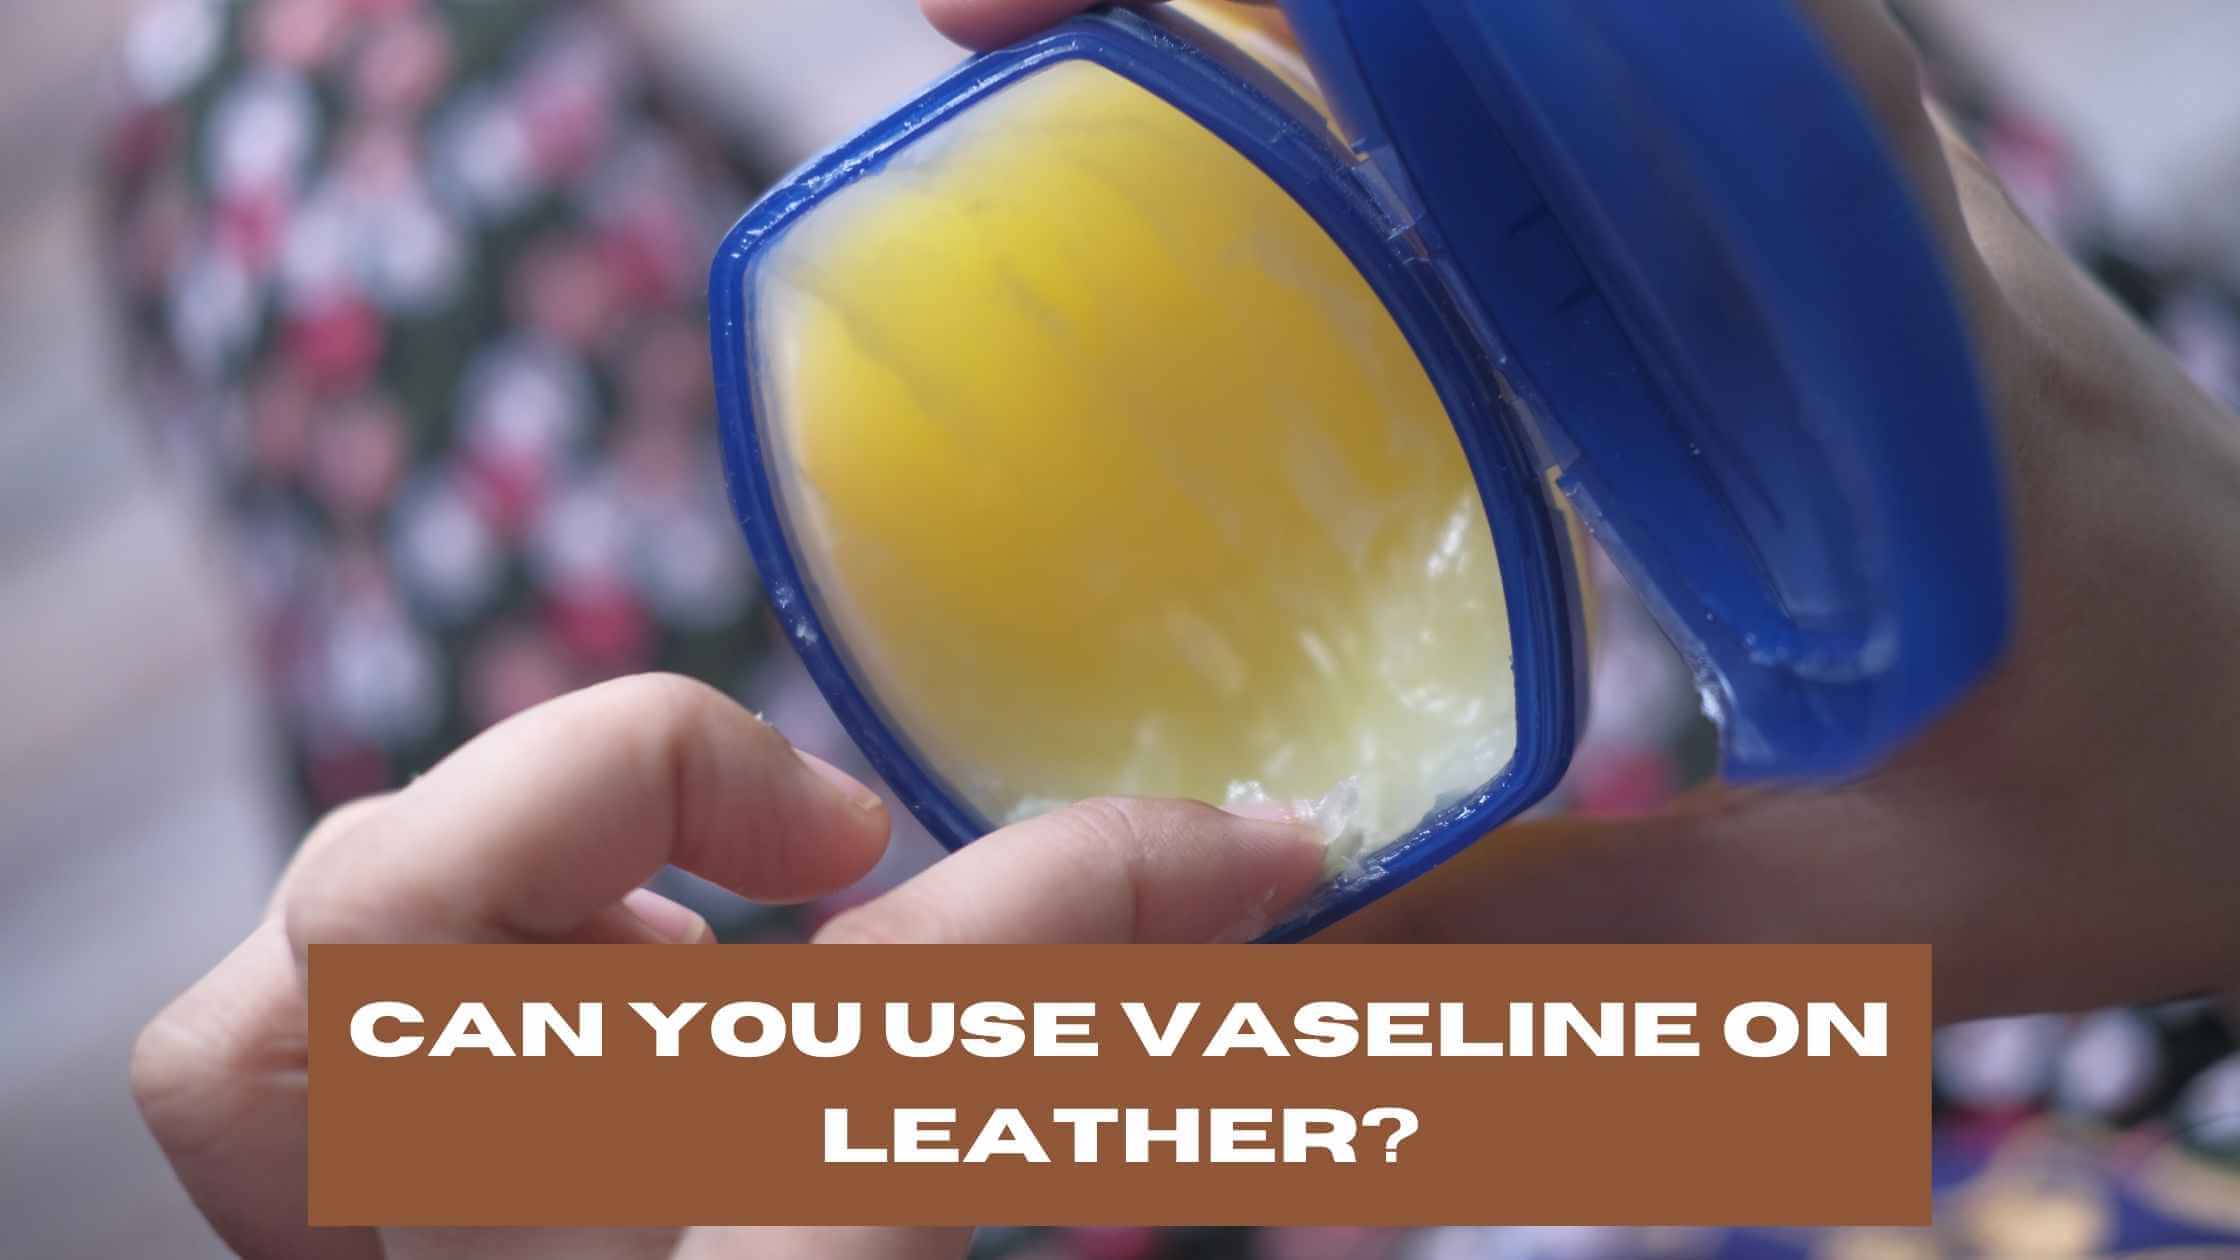 Can You Use Vaseline on Leather